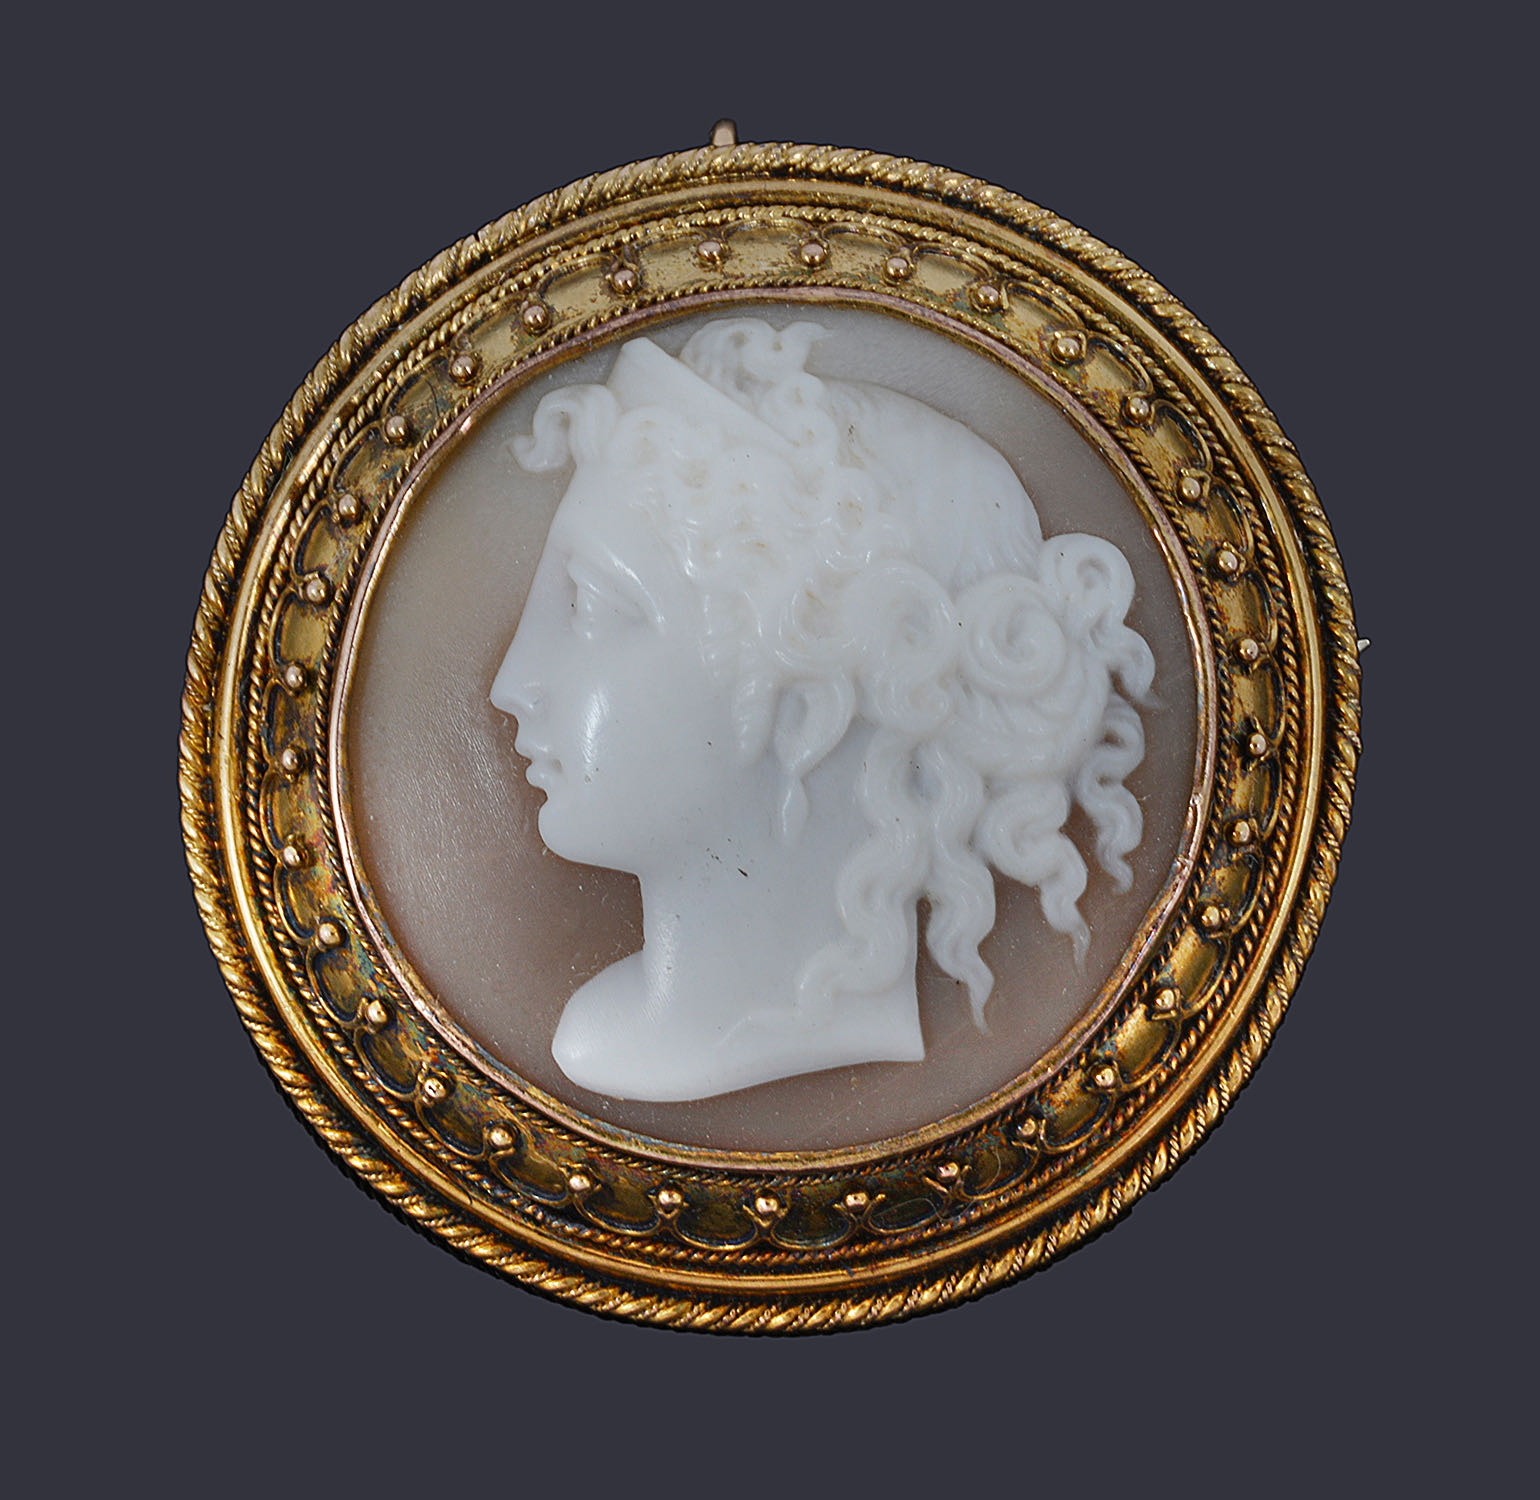 A Victorian Etruscan revival style circular shell cameo brooch